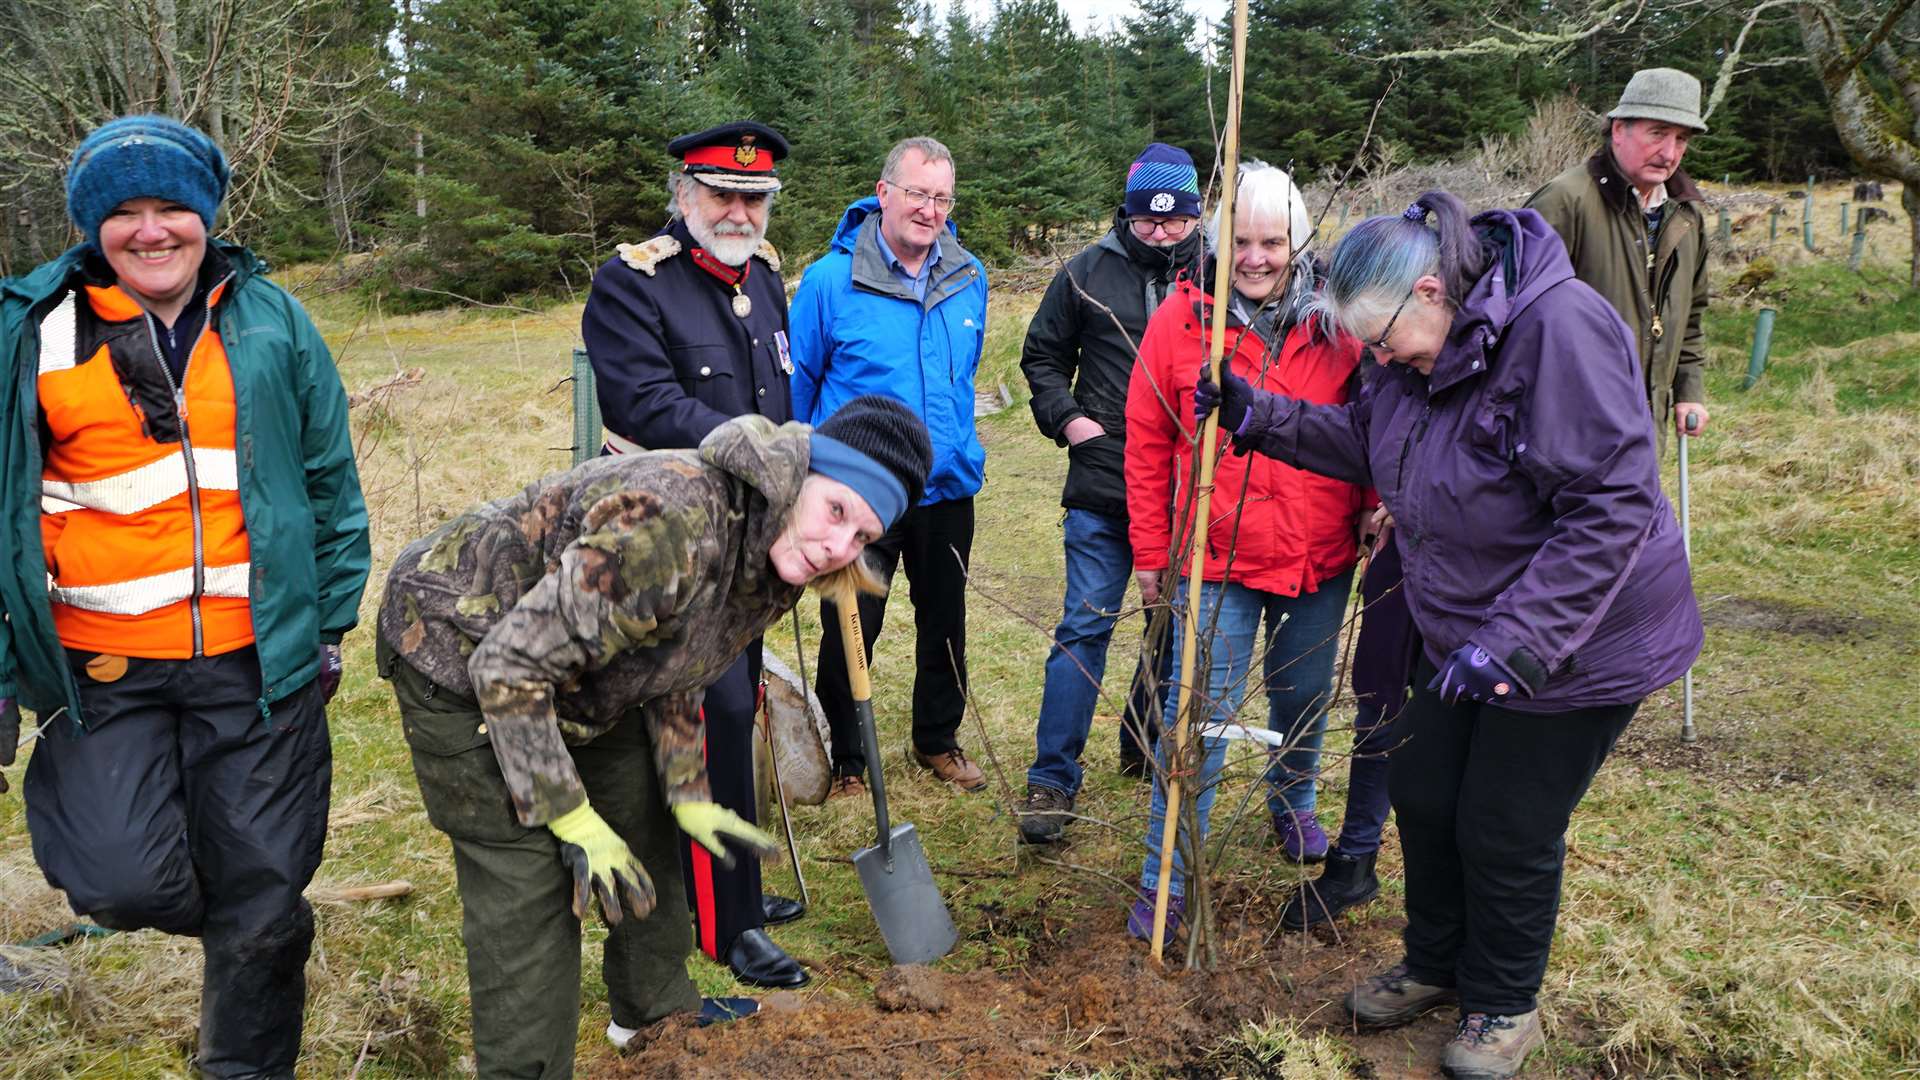 The tree gets a final push down from all the boots of those who attended the event. Picture: DGS